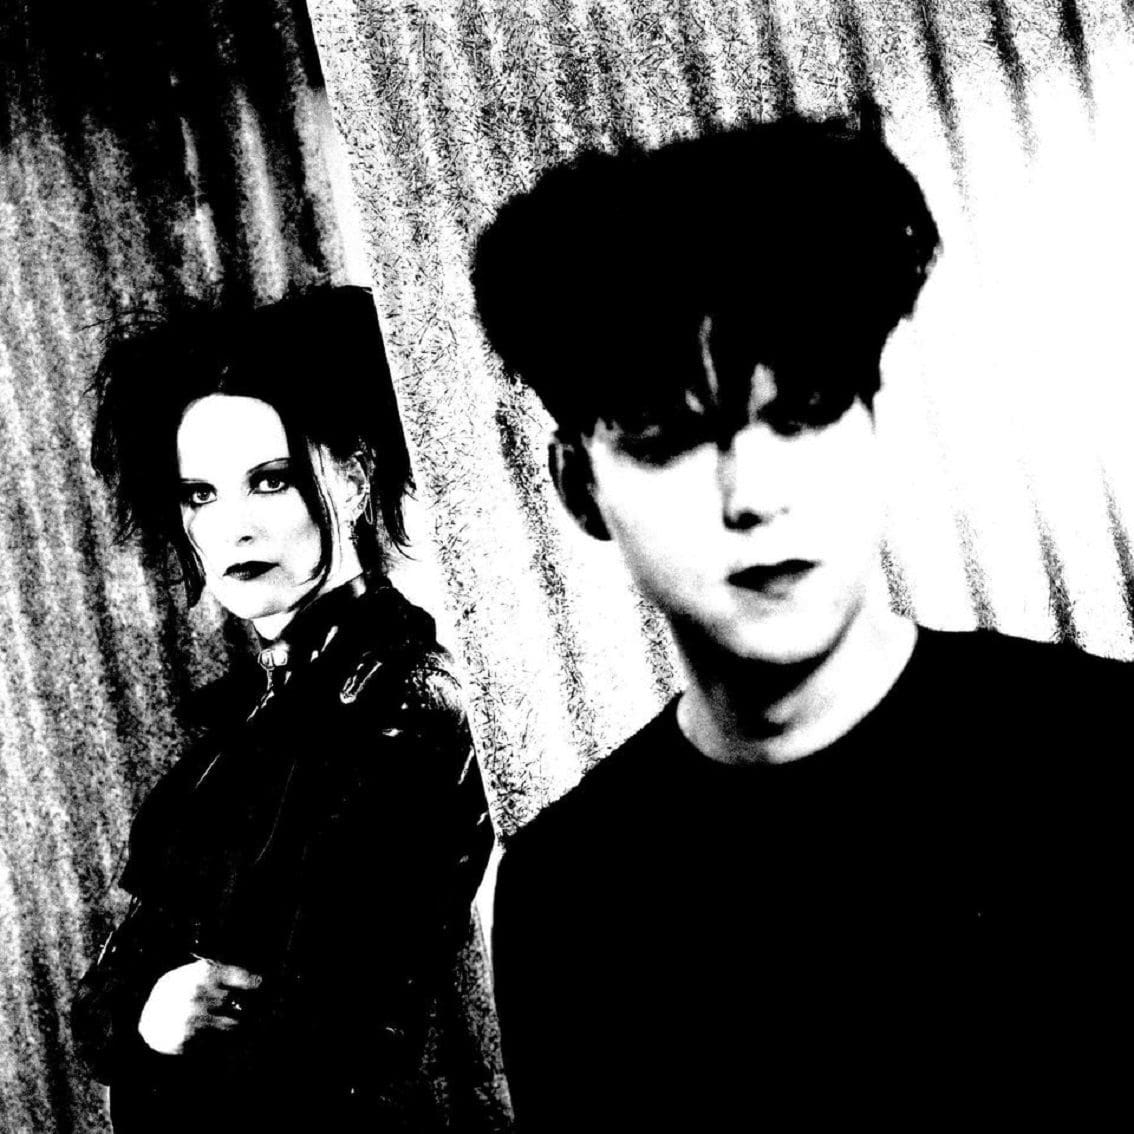 Clan Of Xymox returns with all new album 'Limbo' in July